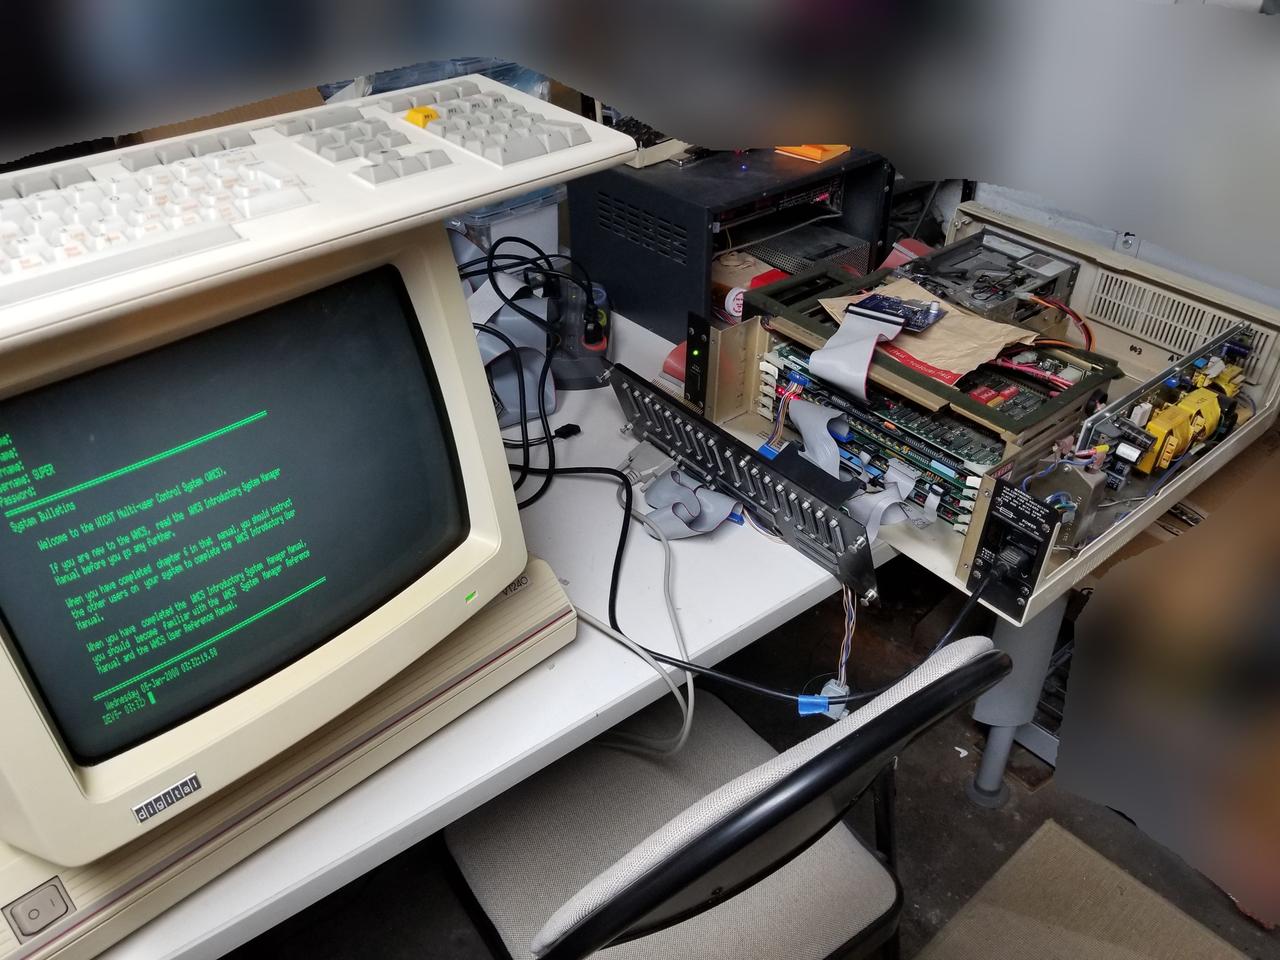 A picture of the ZuluSCSI (v1.1) running inside our WICAT S2150, connected to a DEC VT240 with colour VR241 monitor.